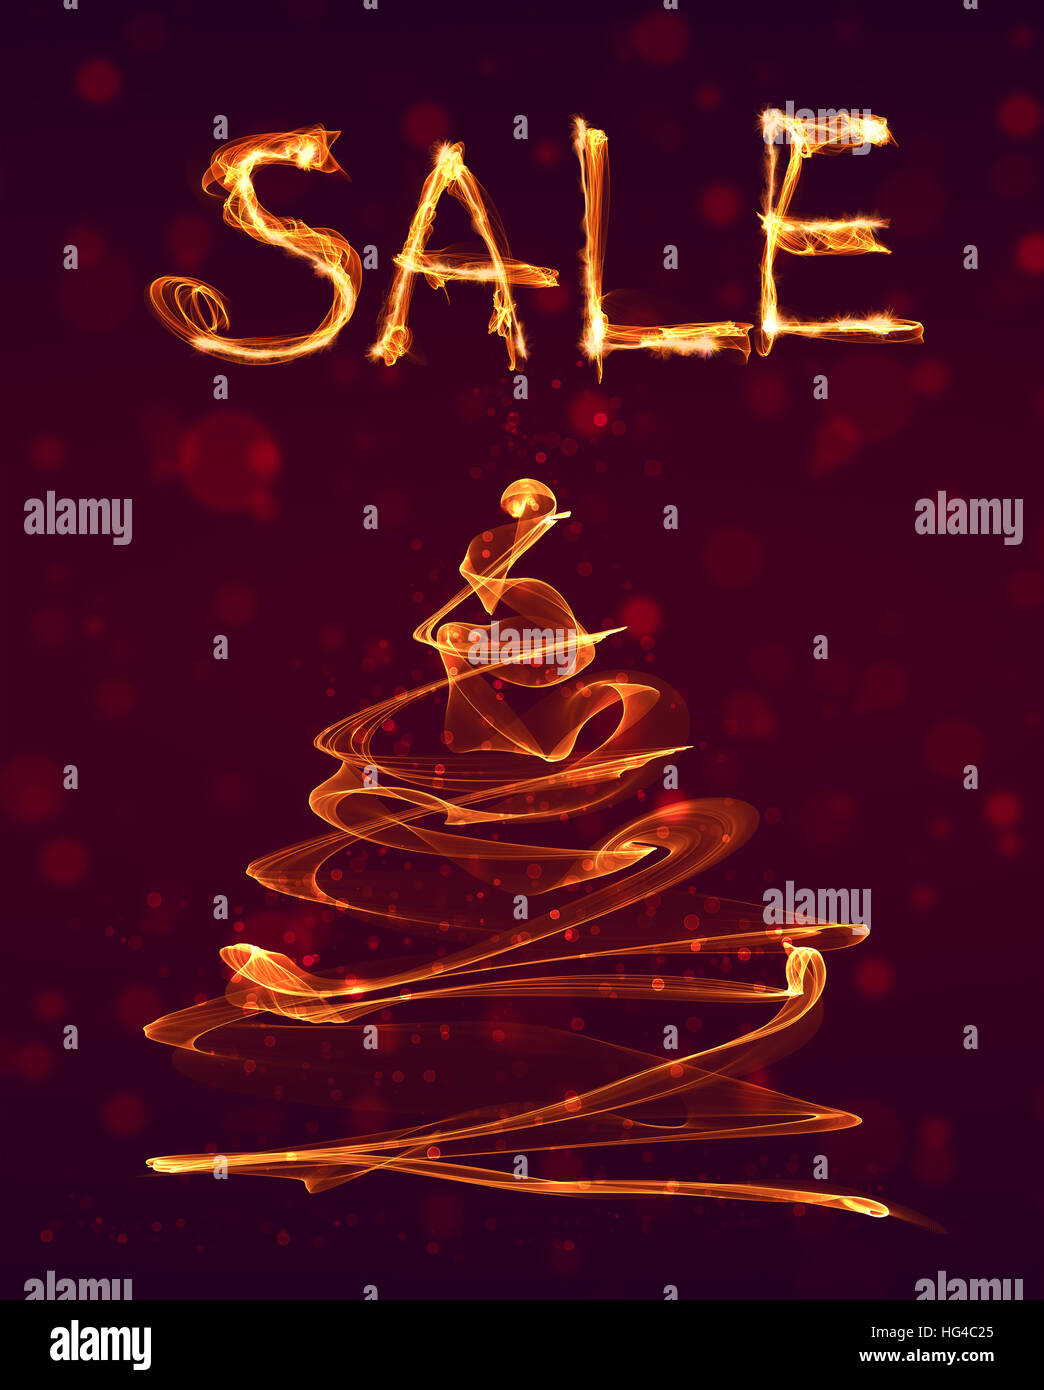 Big final sale, special hot sale offer background in fire, wave and bokeh with holiday fir tree. Banner or poster for e-commerce, shop, store. Stock Photo